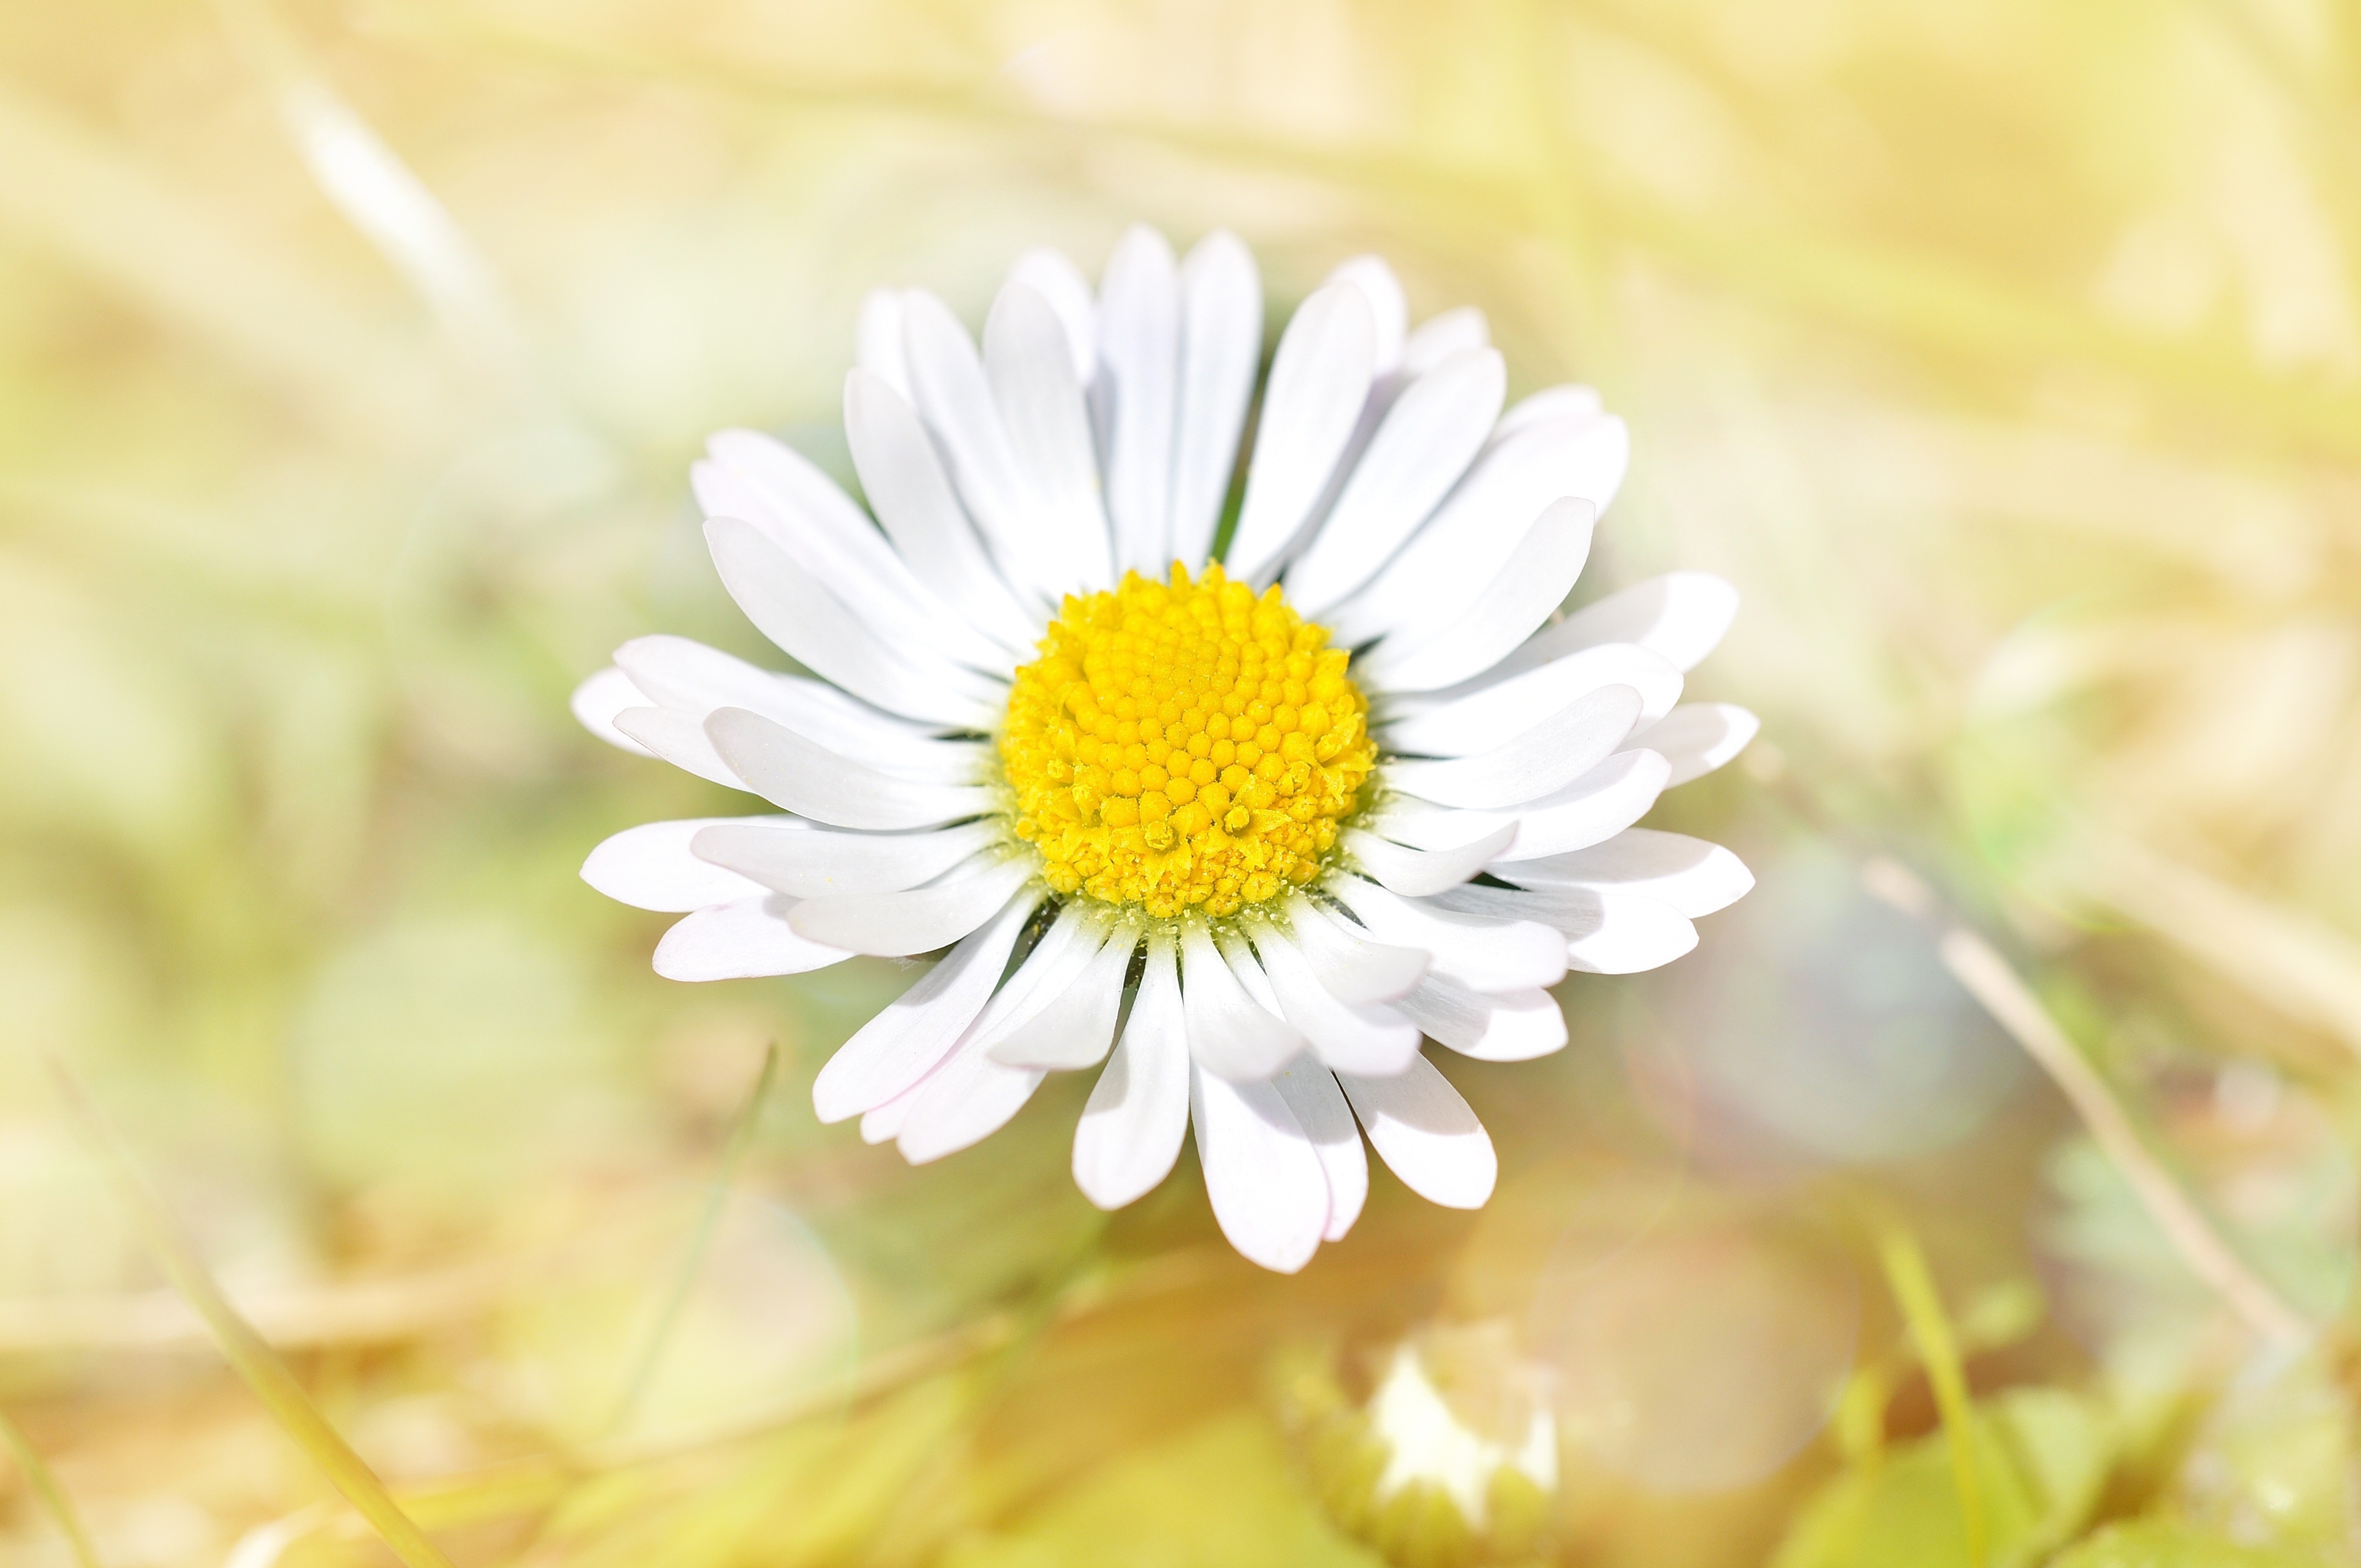 close up photo of a white daisy flower in bloom during day time